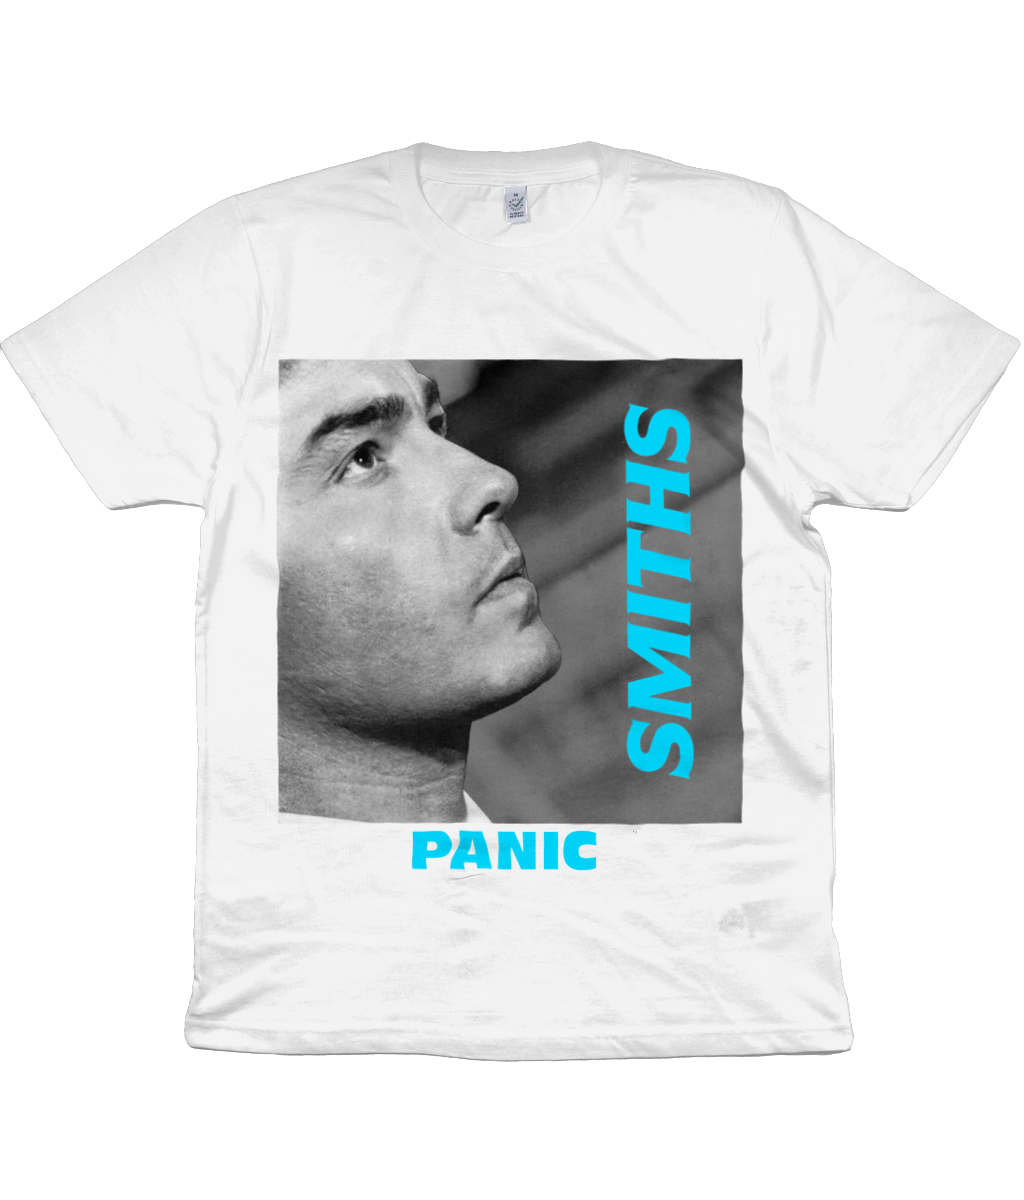 THE SMITHS - PANIC - 1986 - COULD LIFE EVER BE SANE AGAIN?